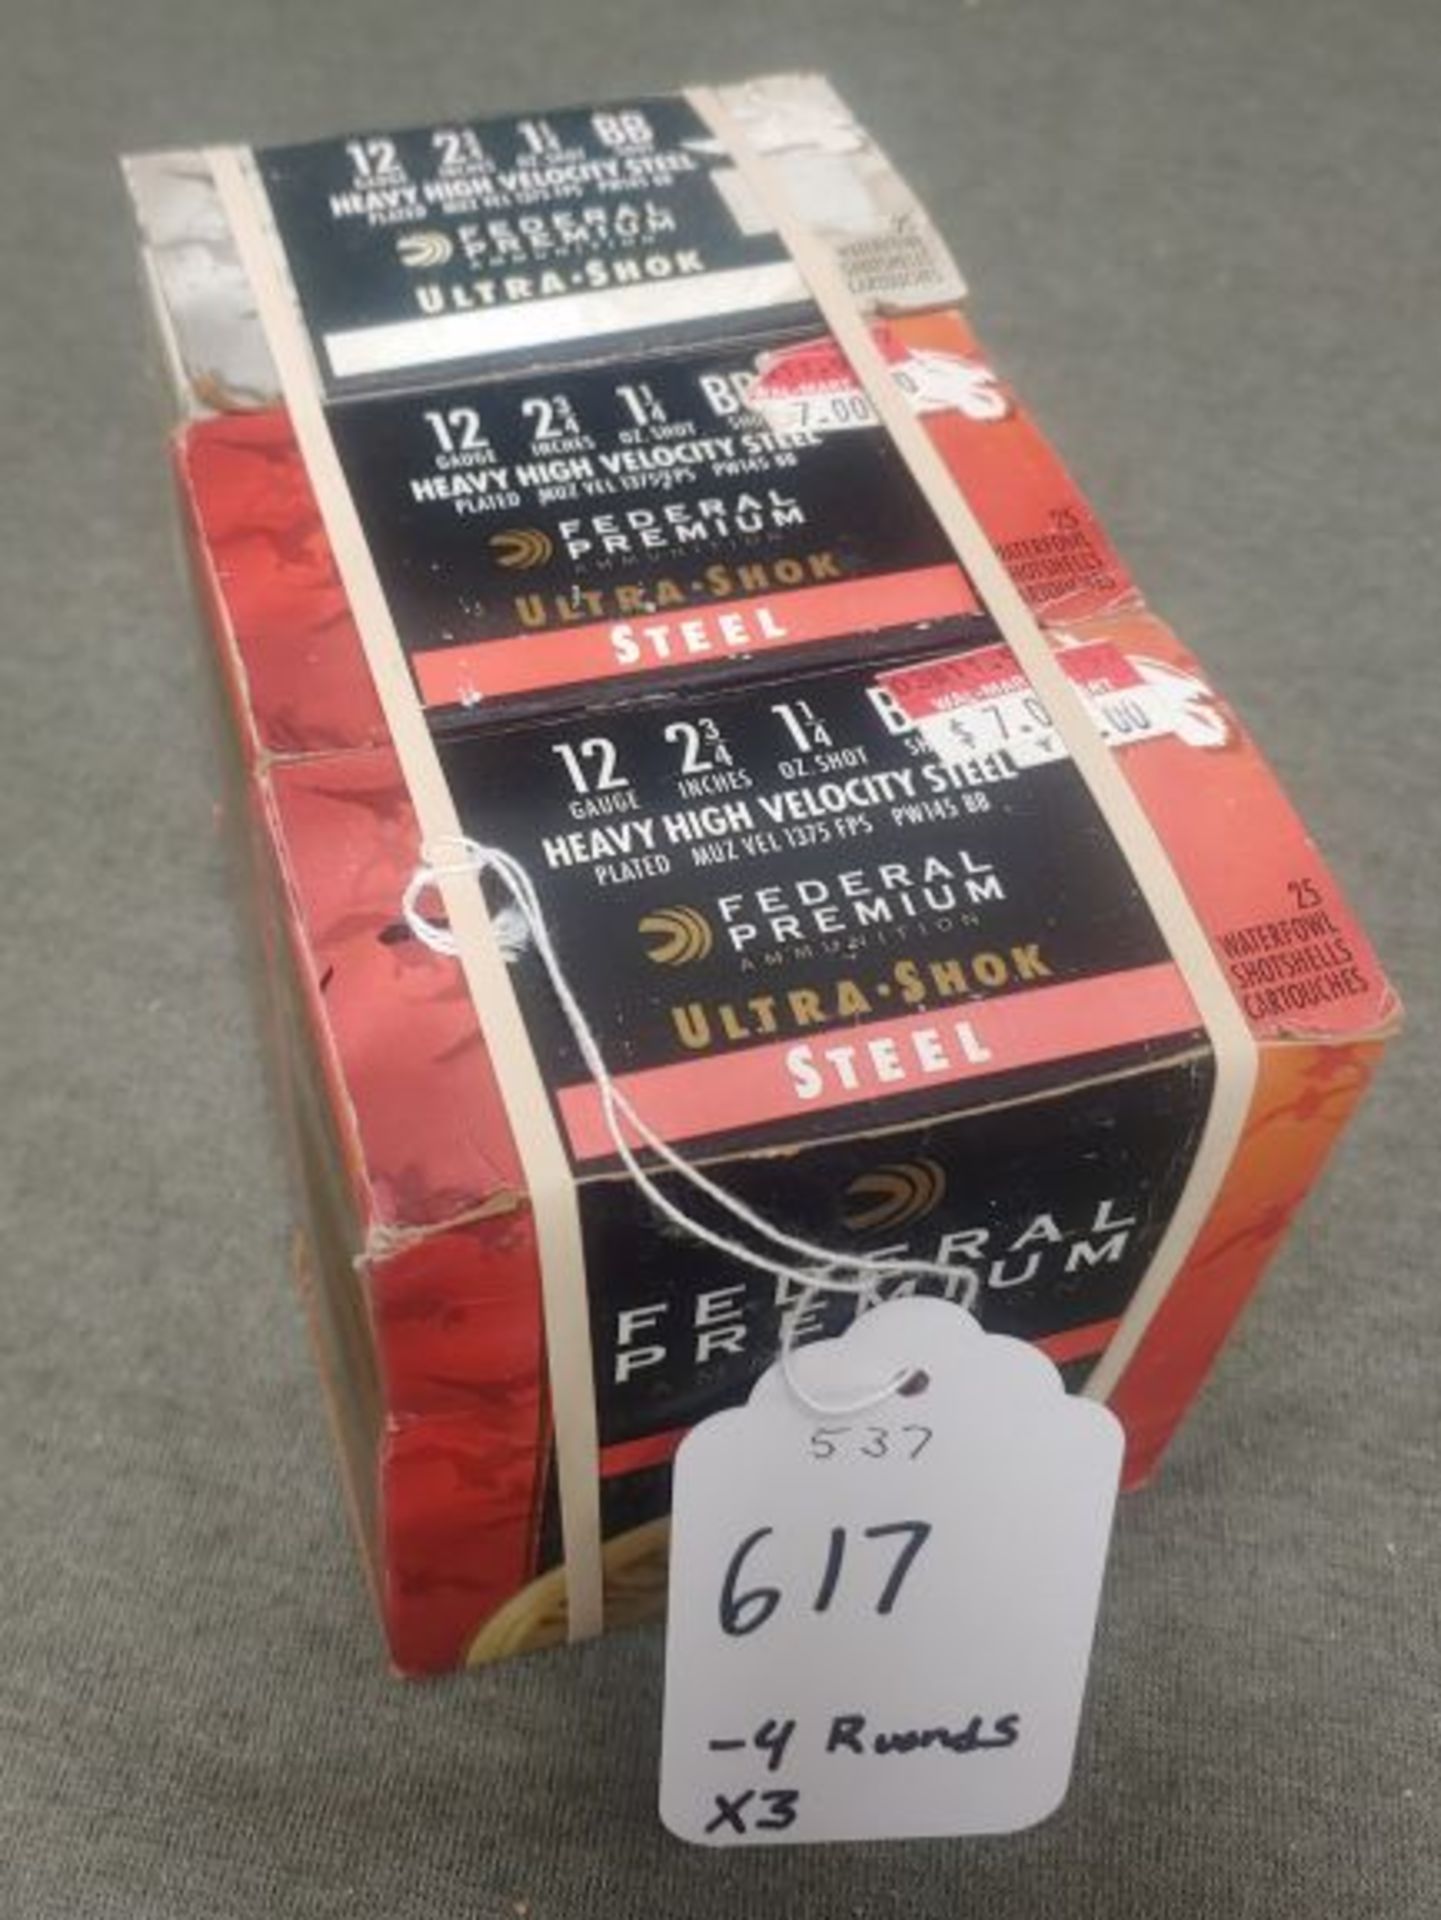 617. Fed 12ga. 2 3/4” BB Shot, 25 Rnd. Boxes Missing For Sales (3x the Money)